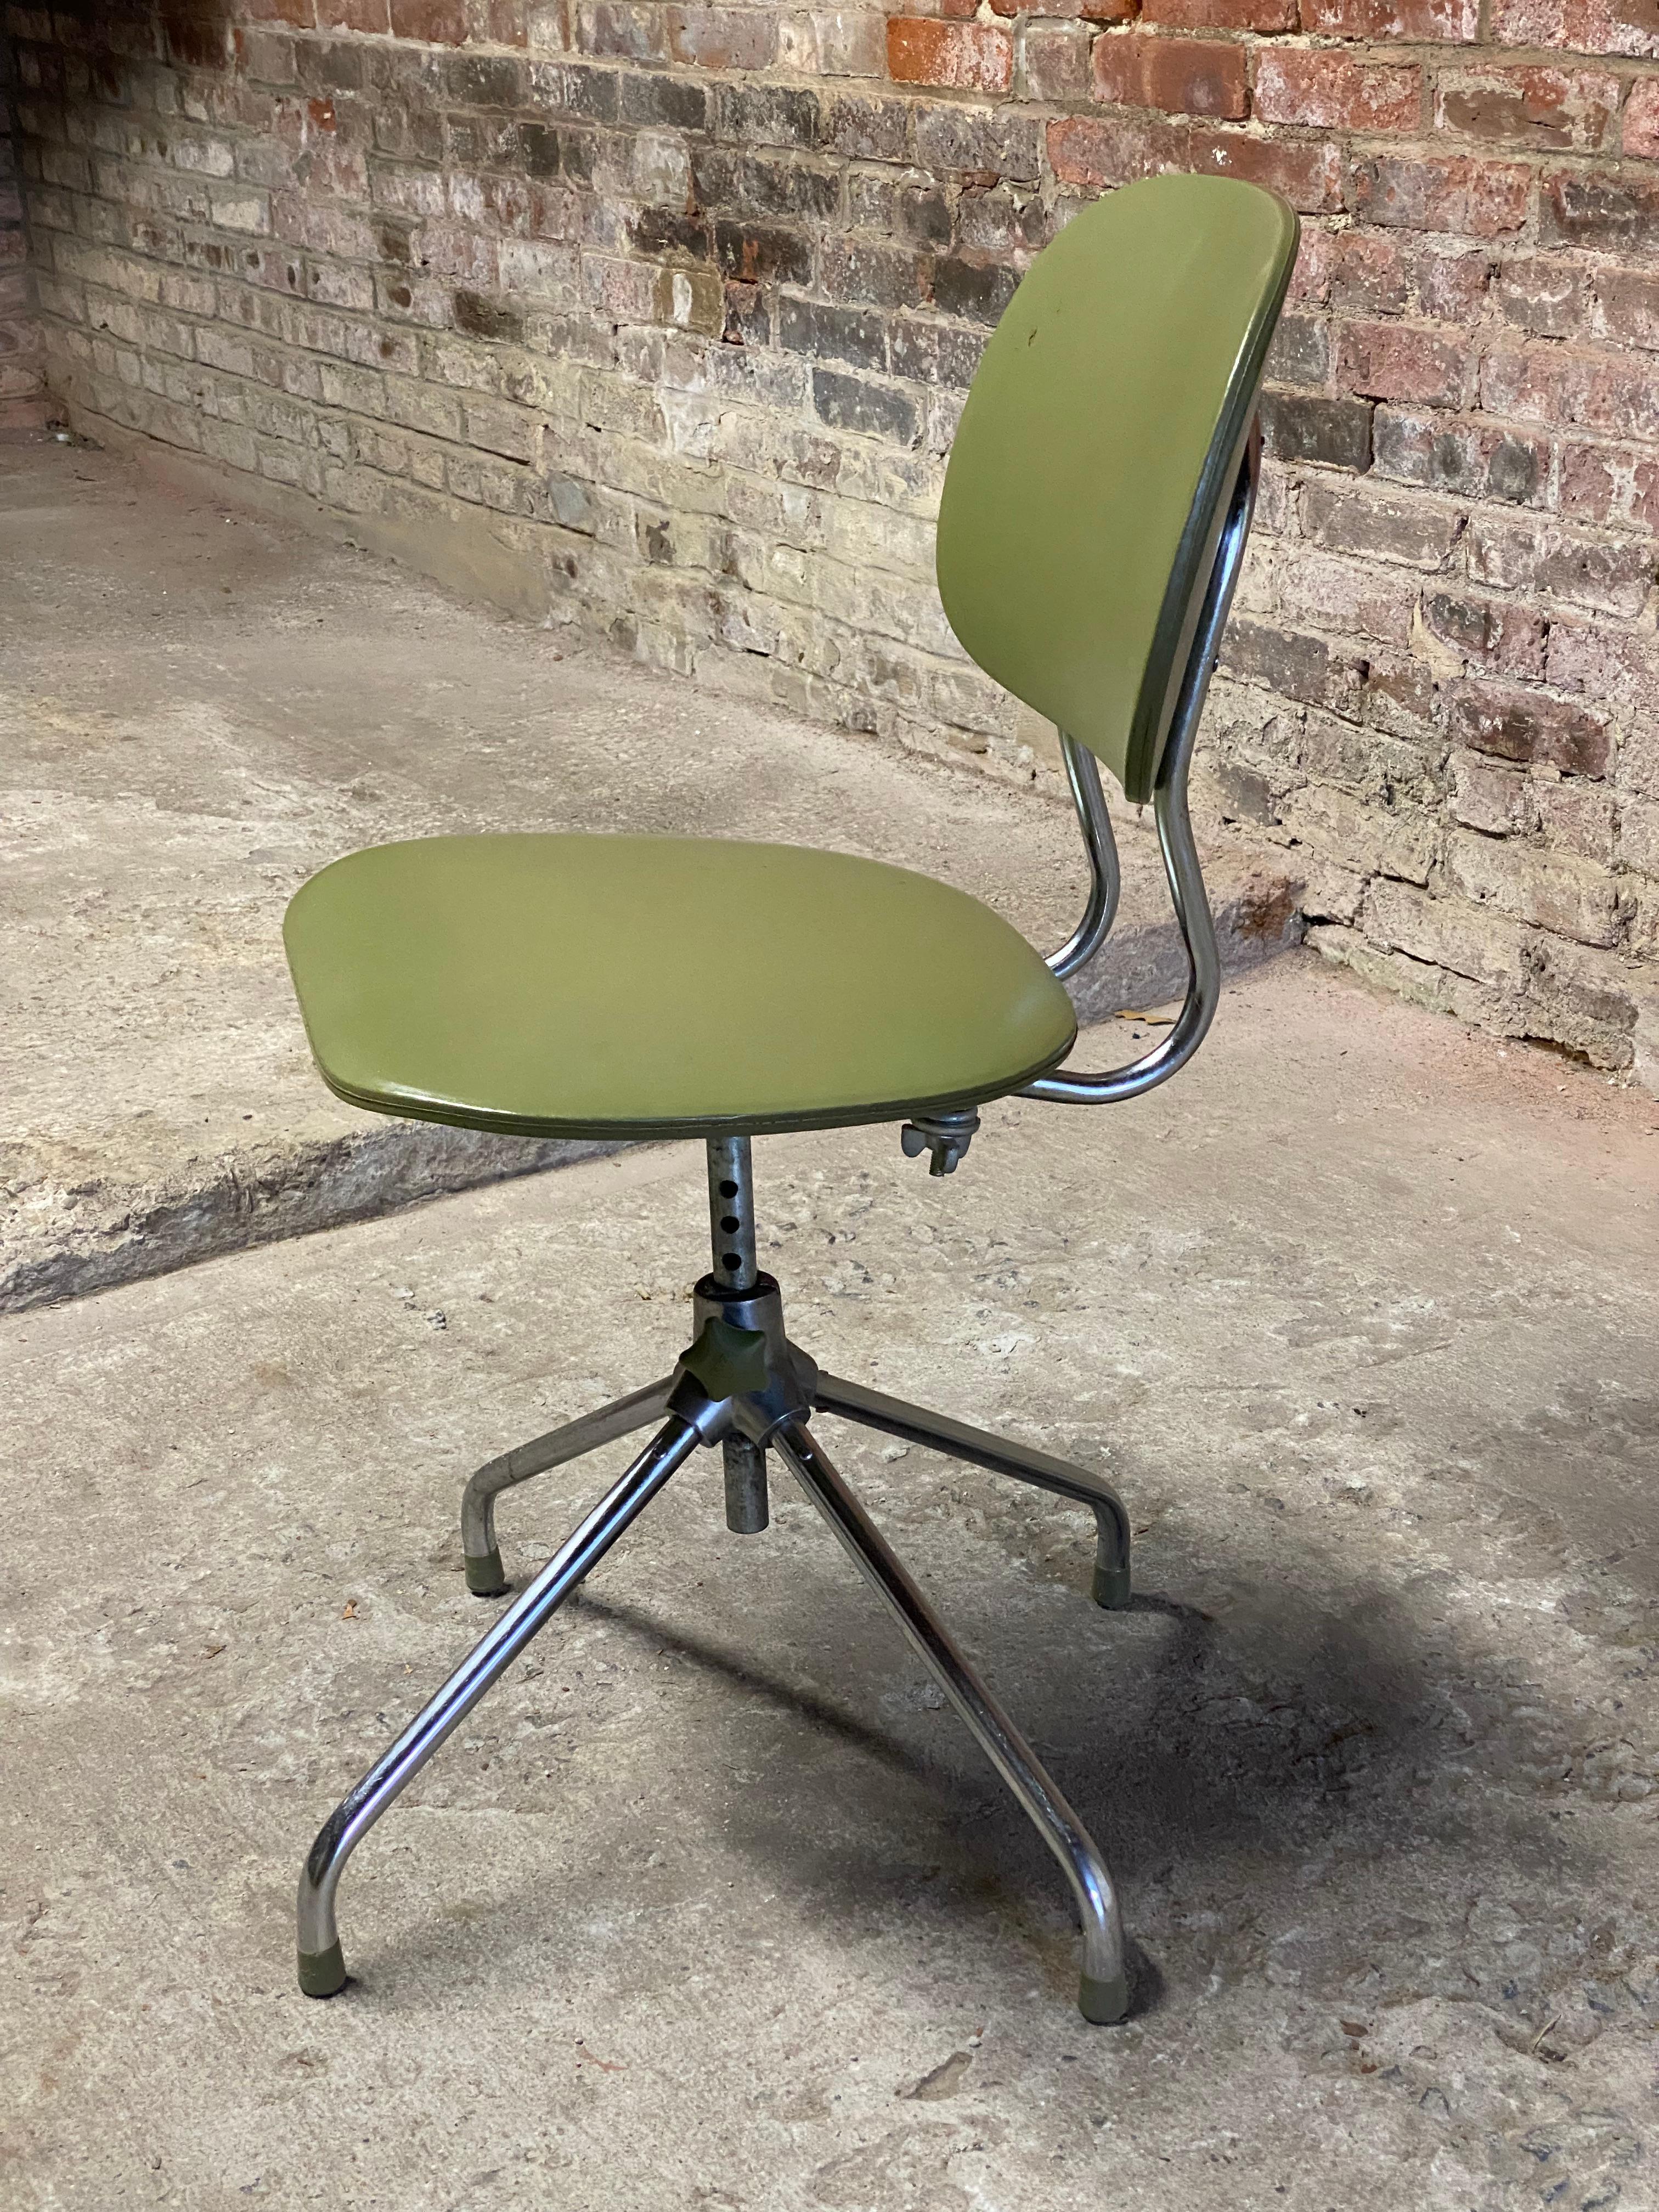 Swivel office chair with avocado vinyl seat and back. Circa 1960-70. Adjustable height and back tension.

Structurally sound and sturdy construction. Wear commensurate with age and use. Some minor fading of the vinyl seat and back. Minor abrasions